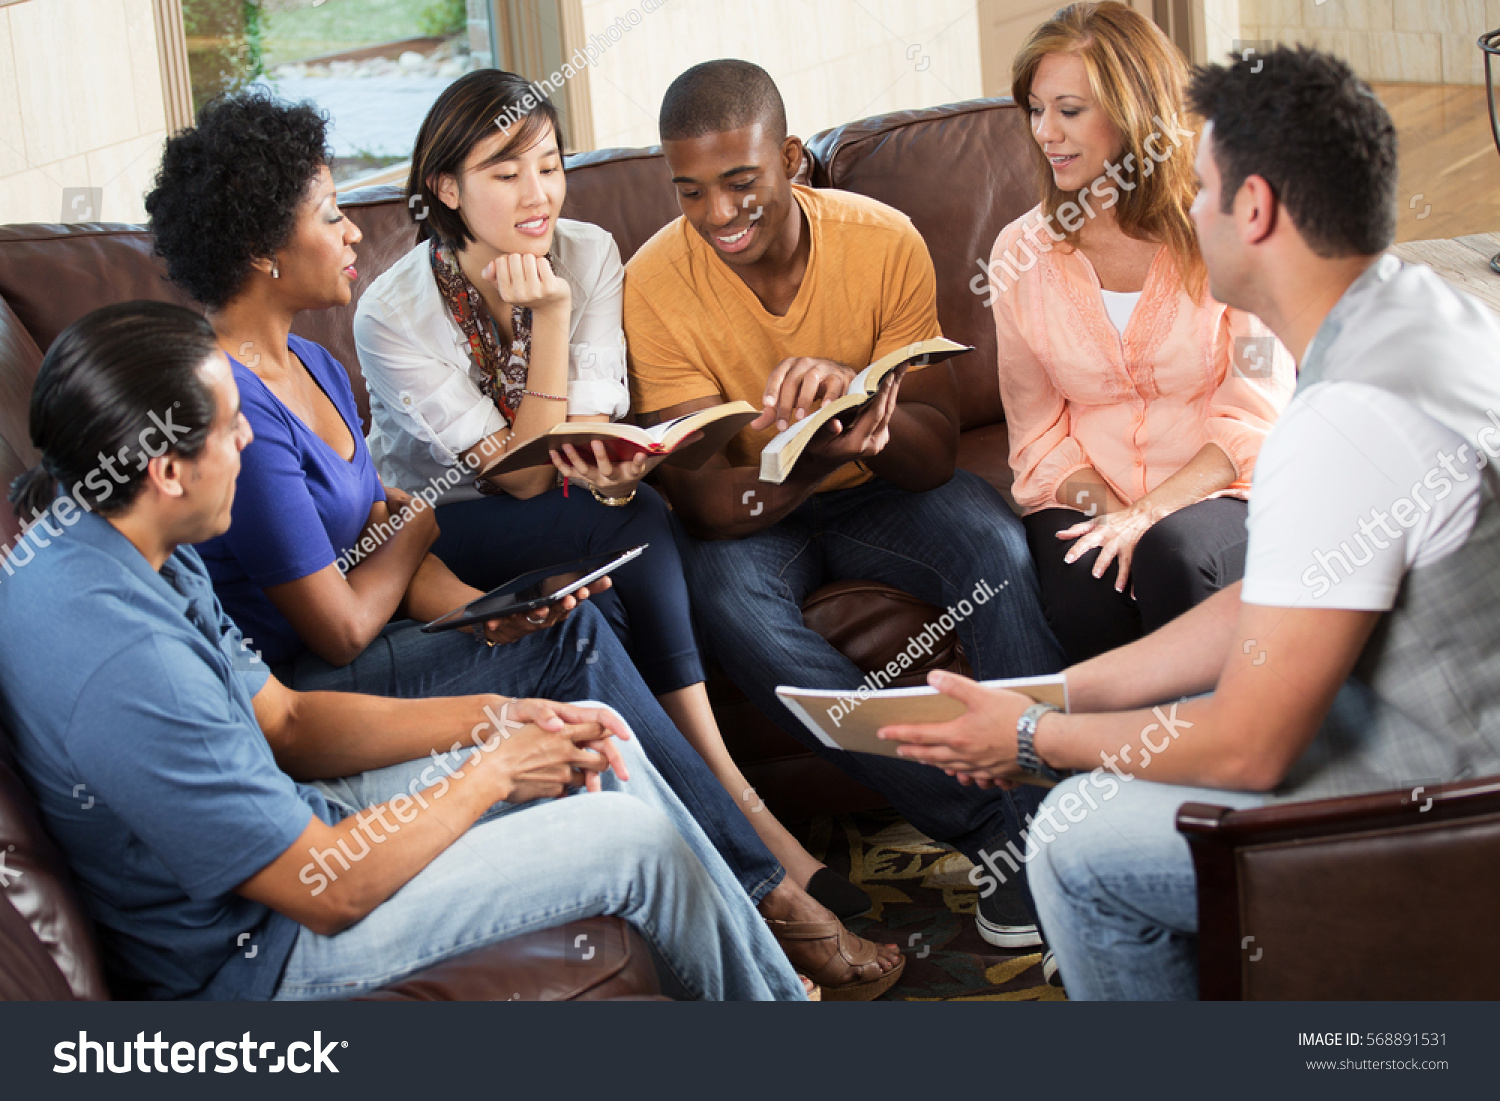 how-to-launch-a-small-group-bible-study-bible-study-group-bible